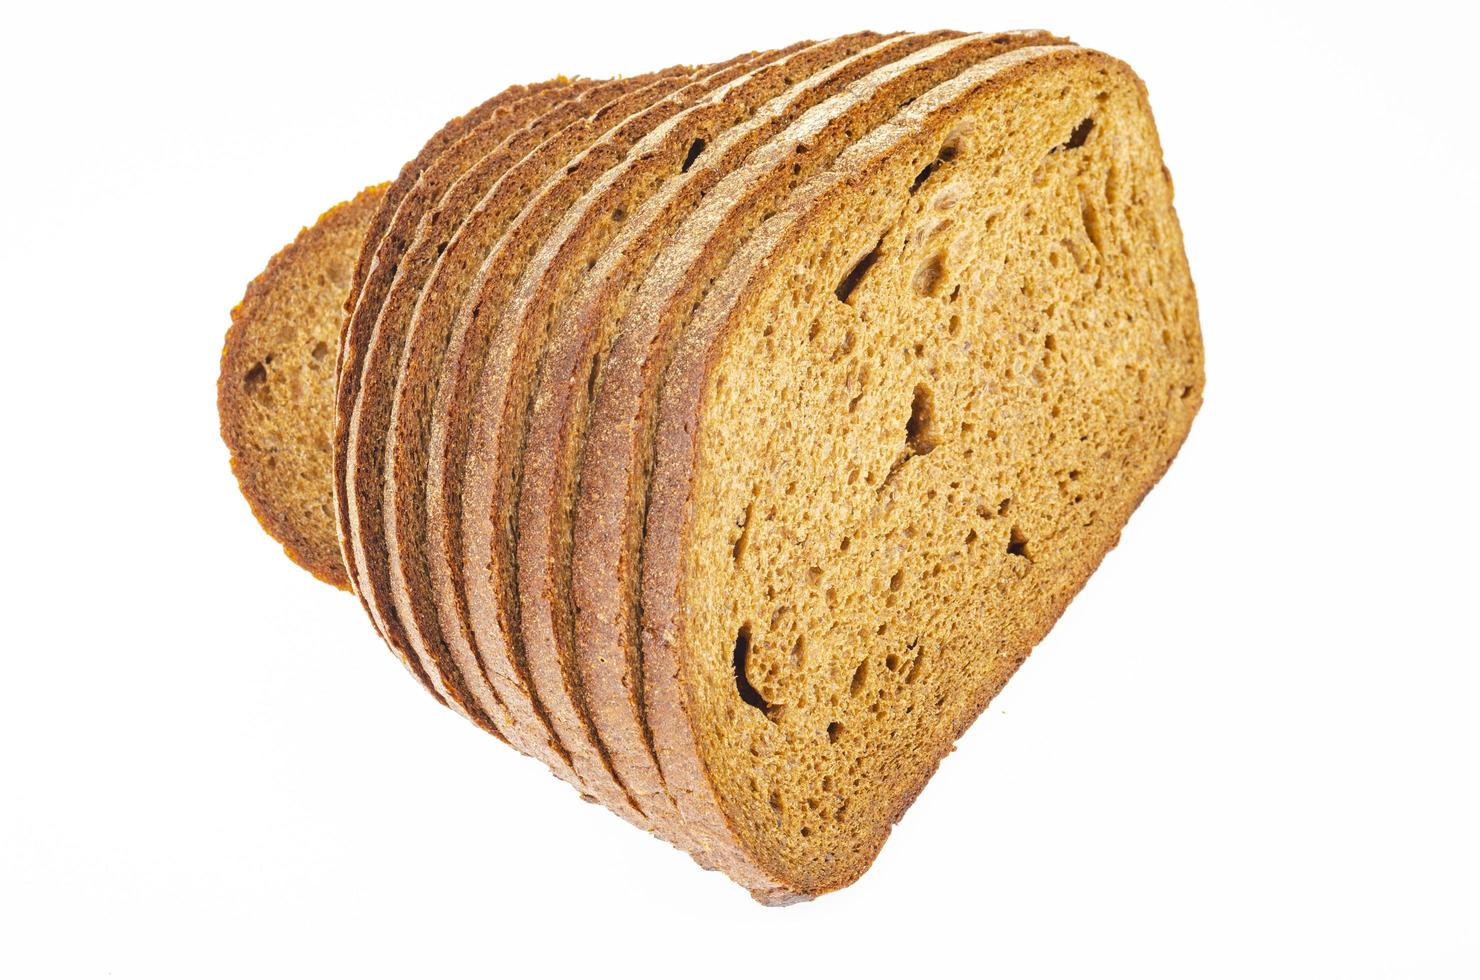 Slices of sliced rye bread isolated on white background. Studio Photo